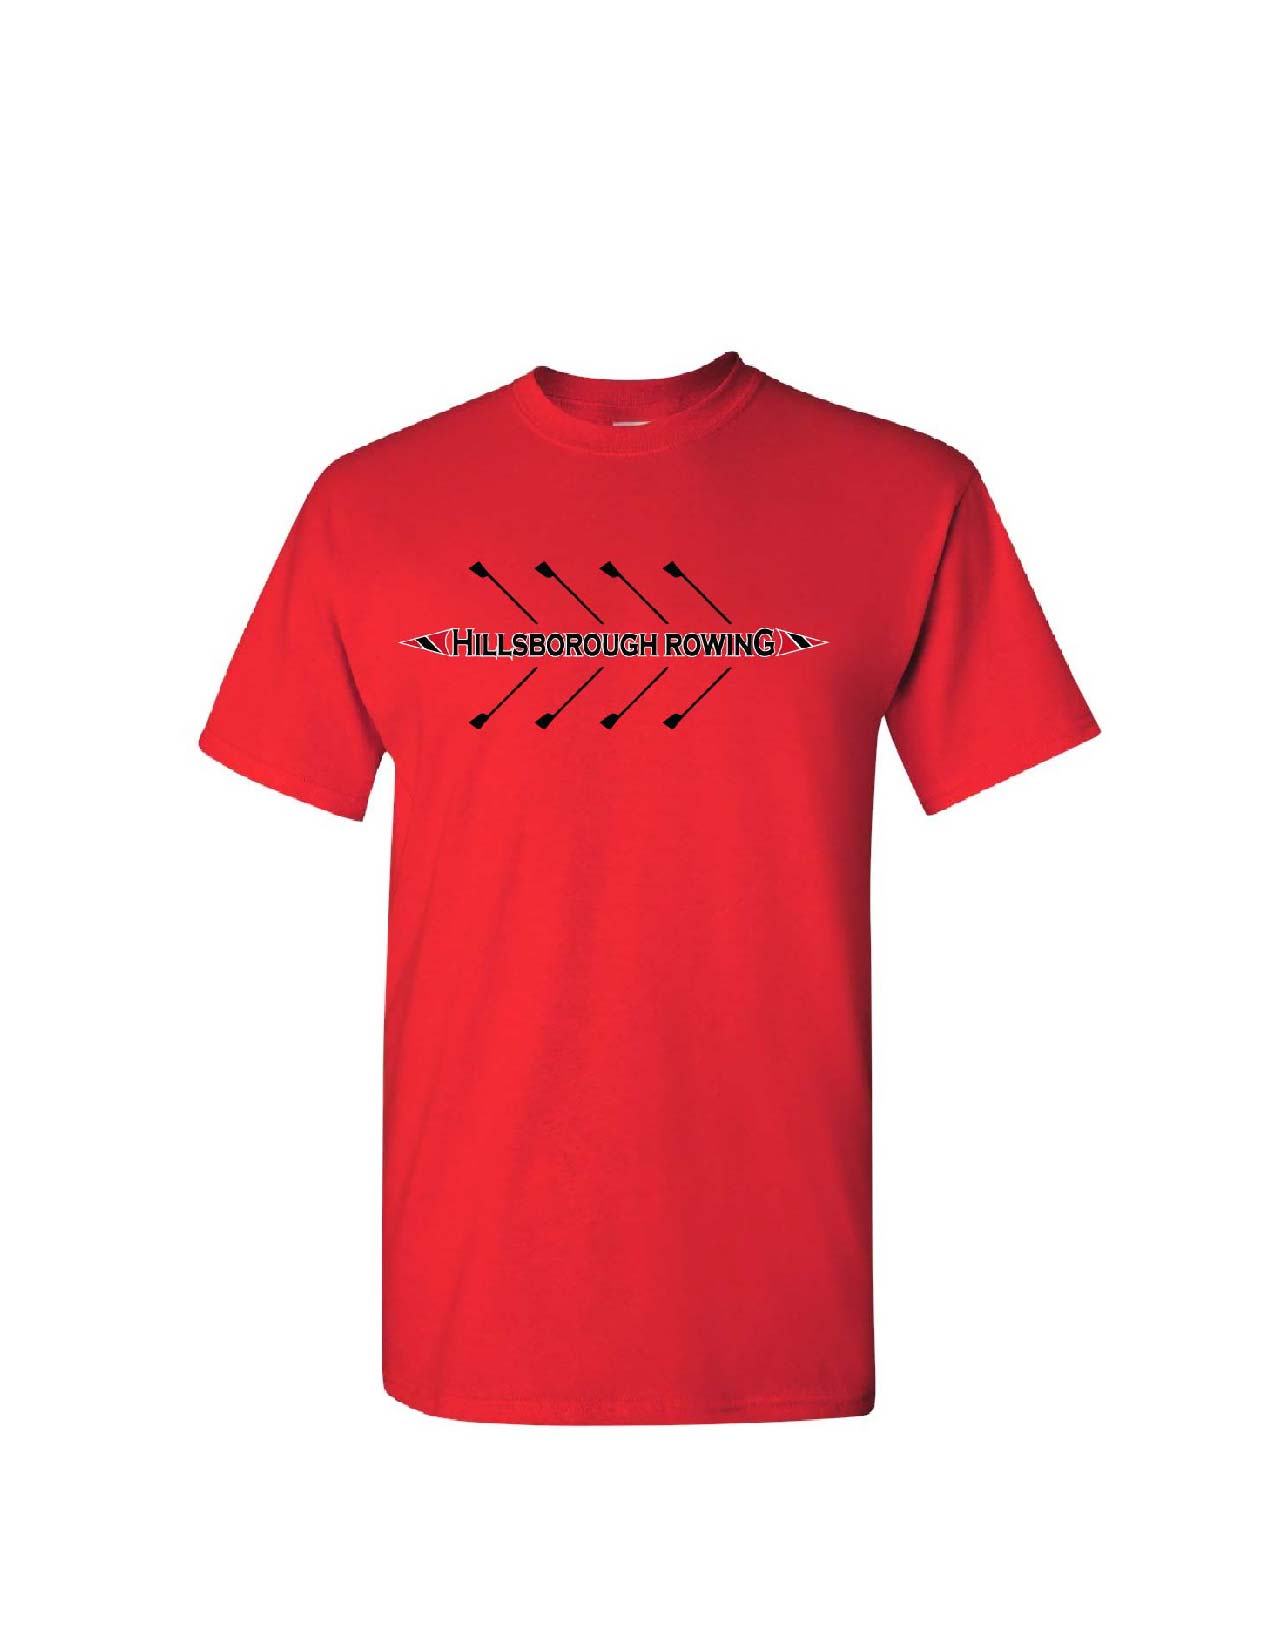 A - HHS Rowing T-Shirt - RED